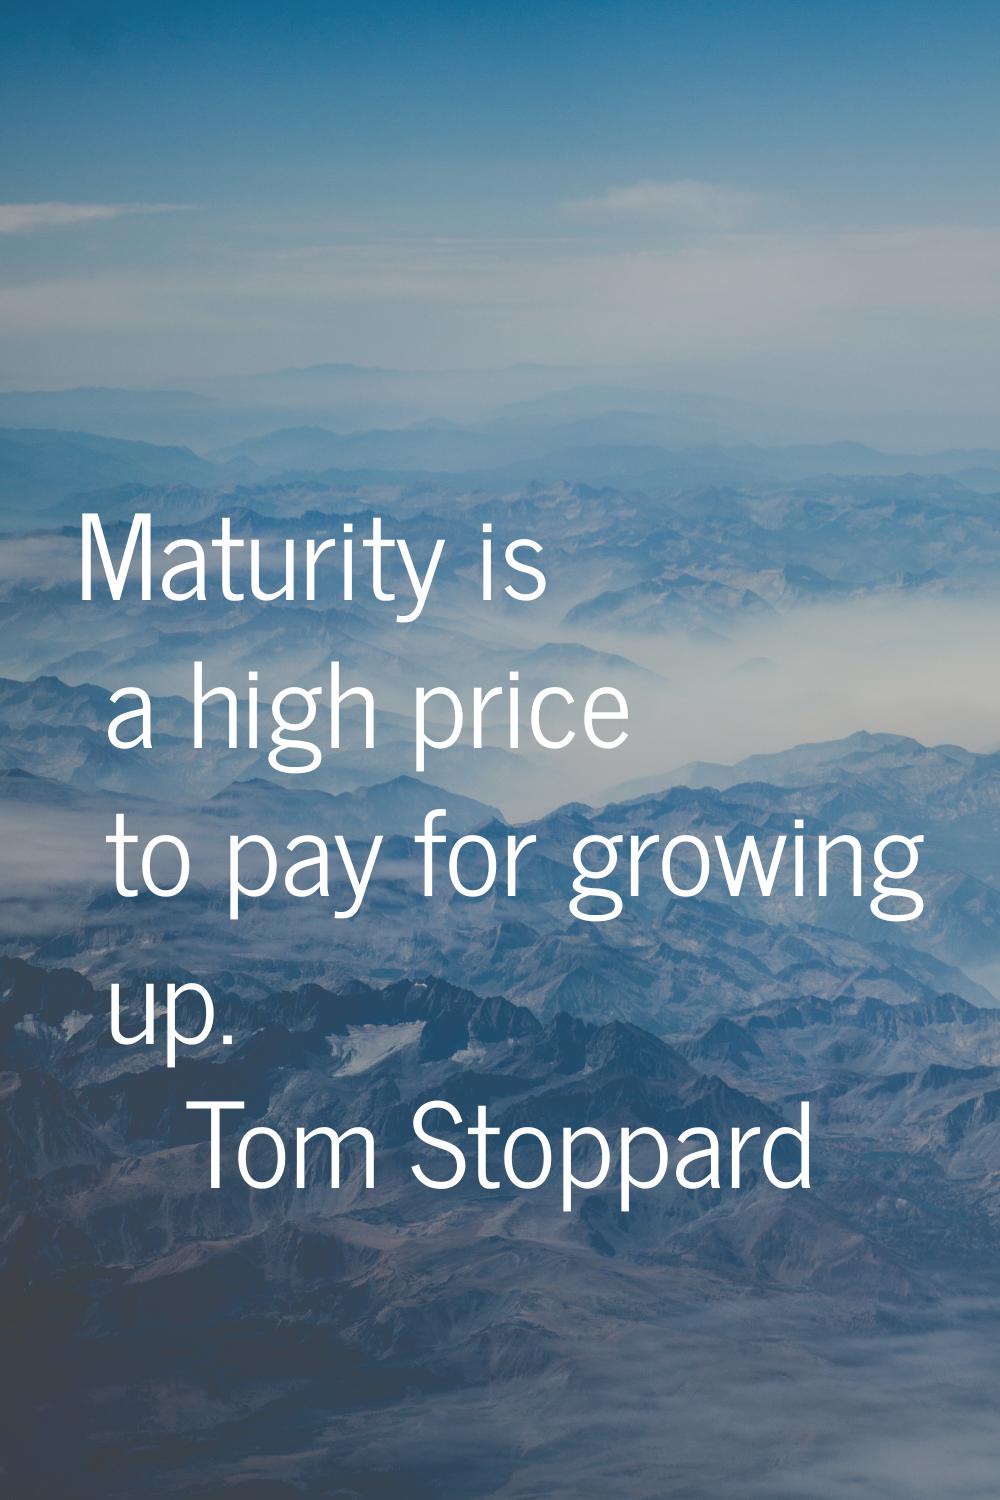 Maturity is a high price to pay for growing up.